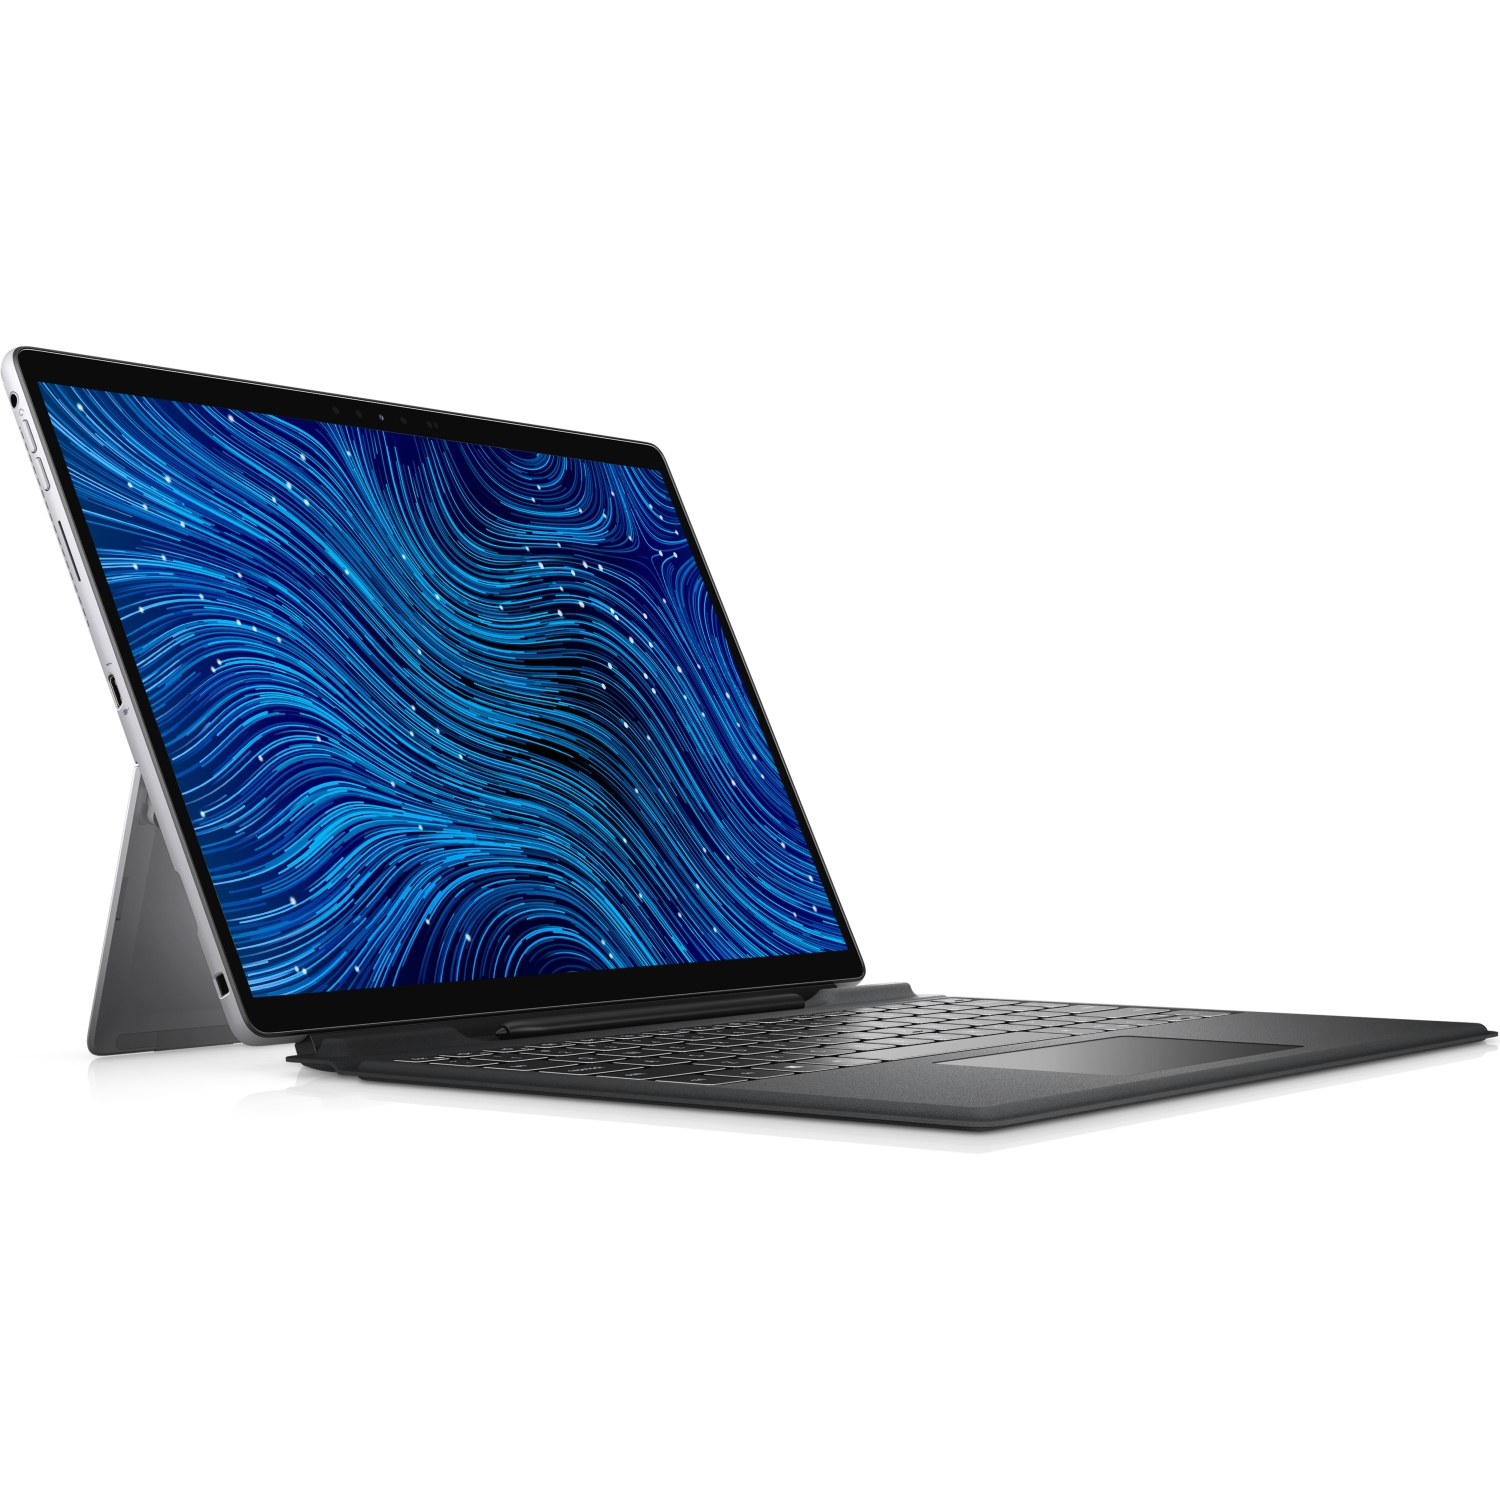 Refurbished (Excellent) – Dell Latitude 7000 7320 Detachable 2-in-1 (2021) | 13" FHD+ Touch | Core i5 - 1TB SSD - 16GB RAM | 4 Cores @ 4.2 GHz - 11th Gen CPU